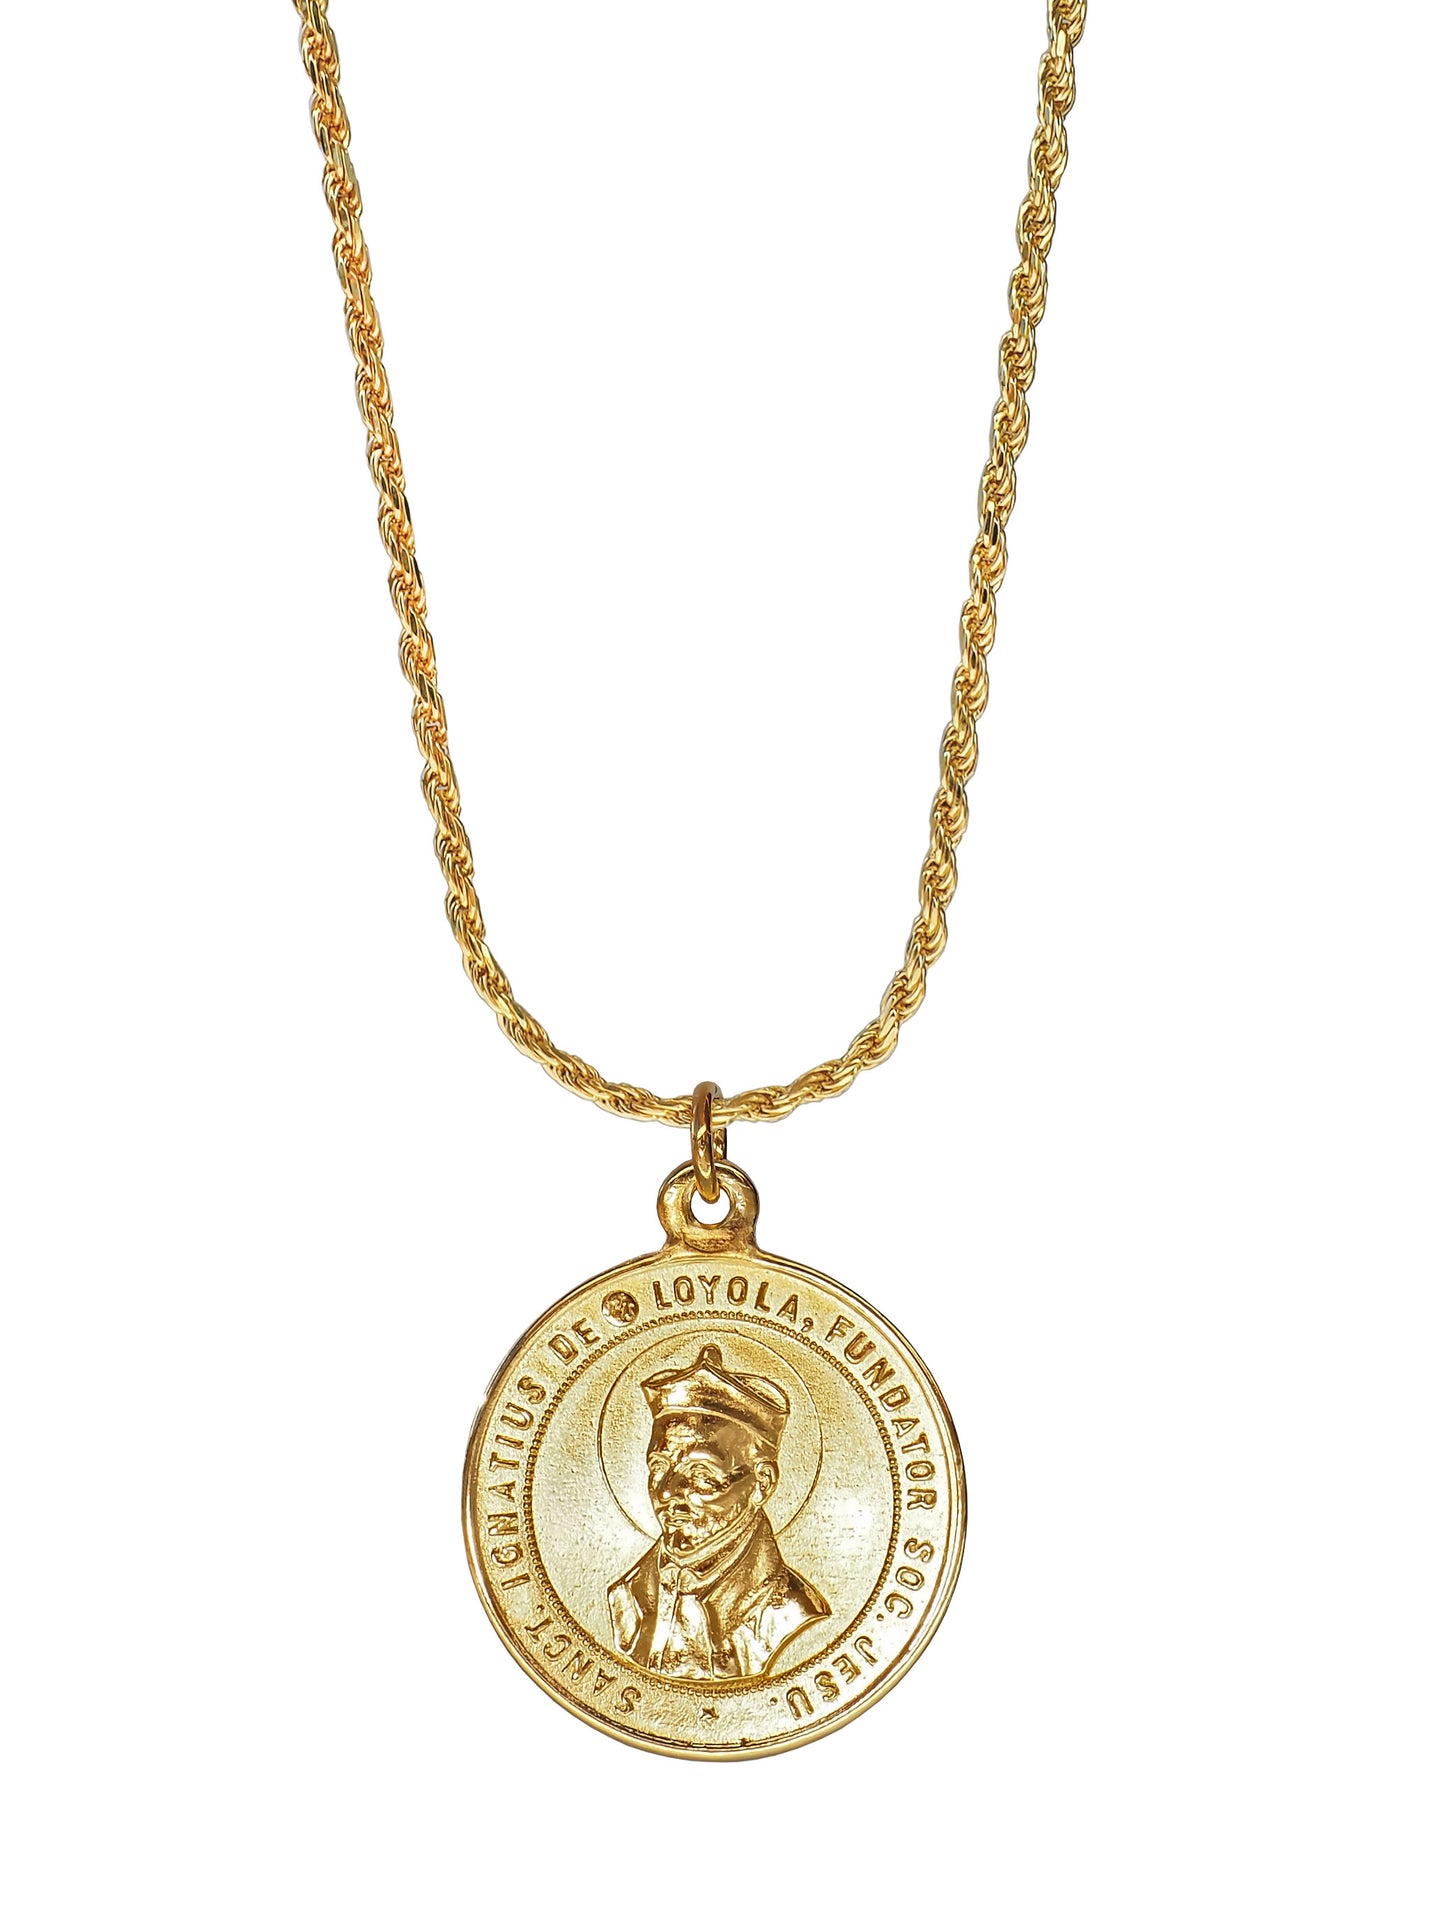 Our Lady of Guadalupe Necklace, gender neutral, gold plated silver, from Mexico. on its back St Ignacio de Loyola